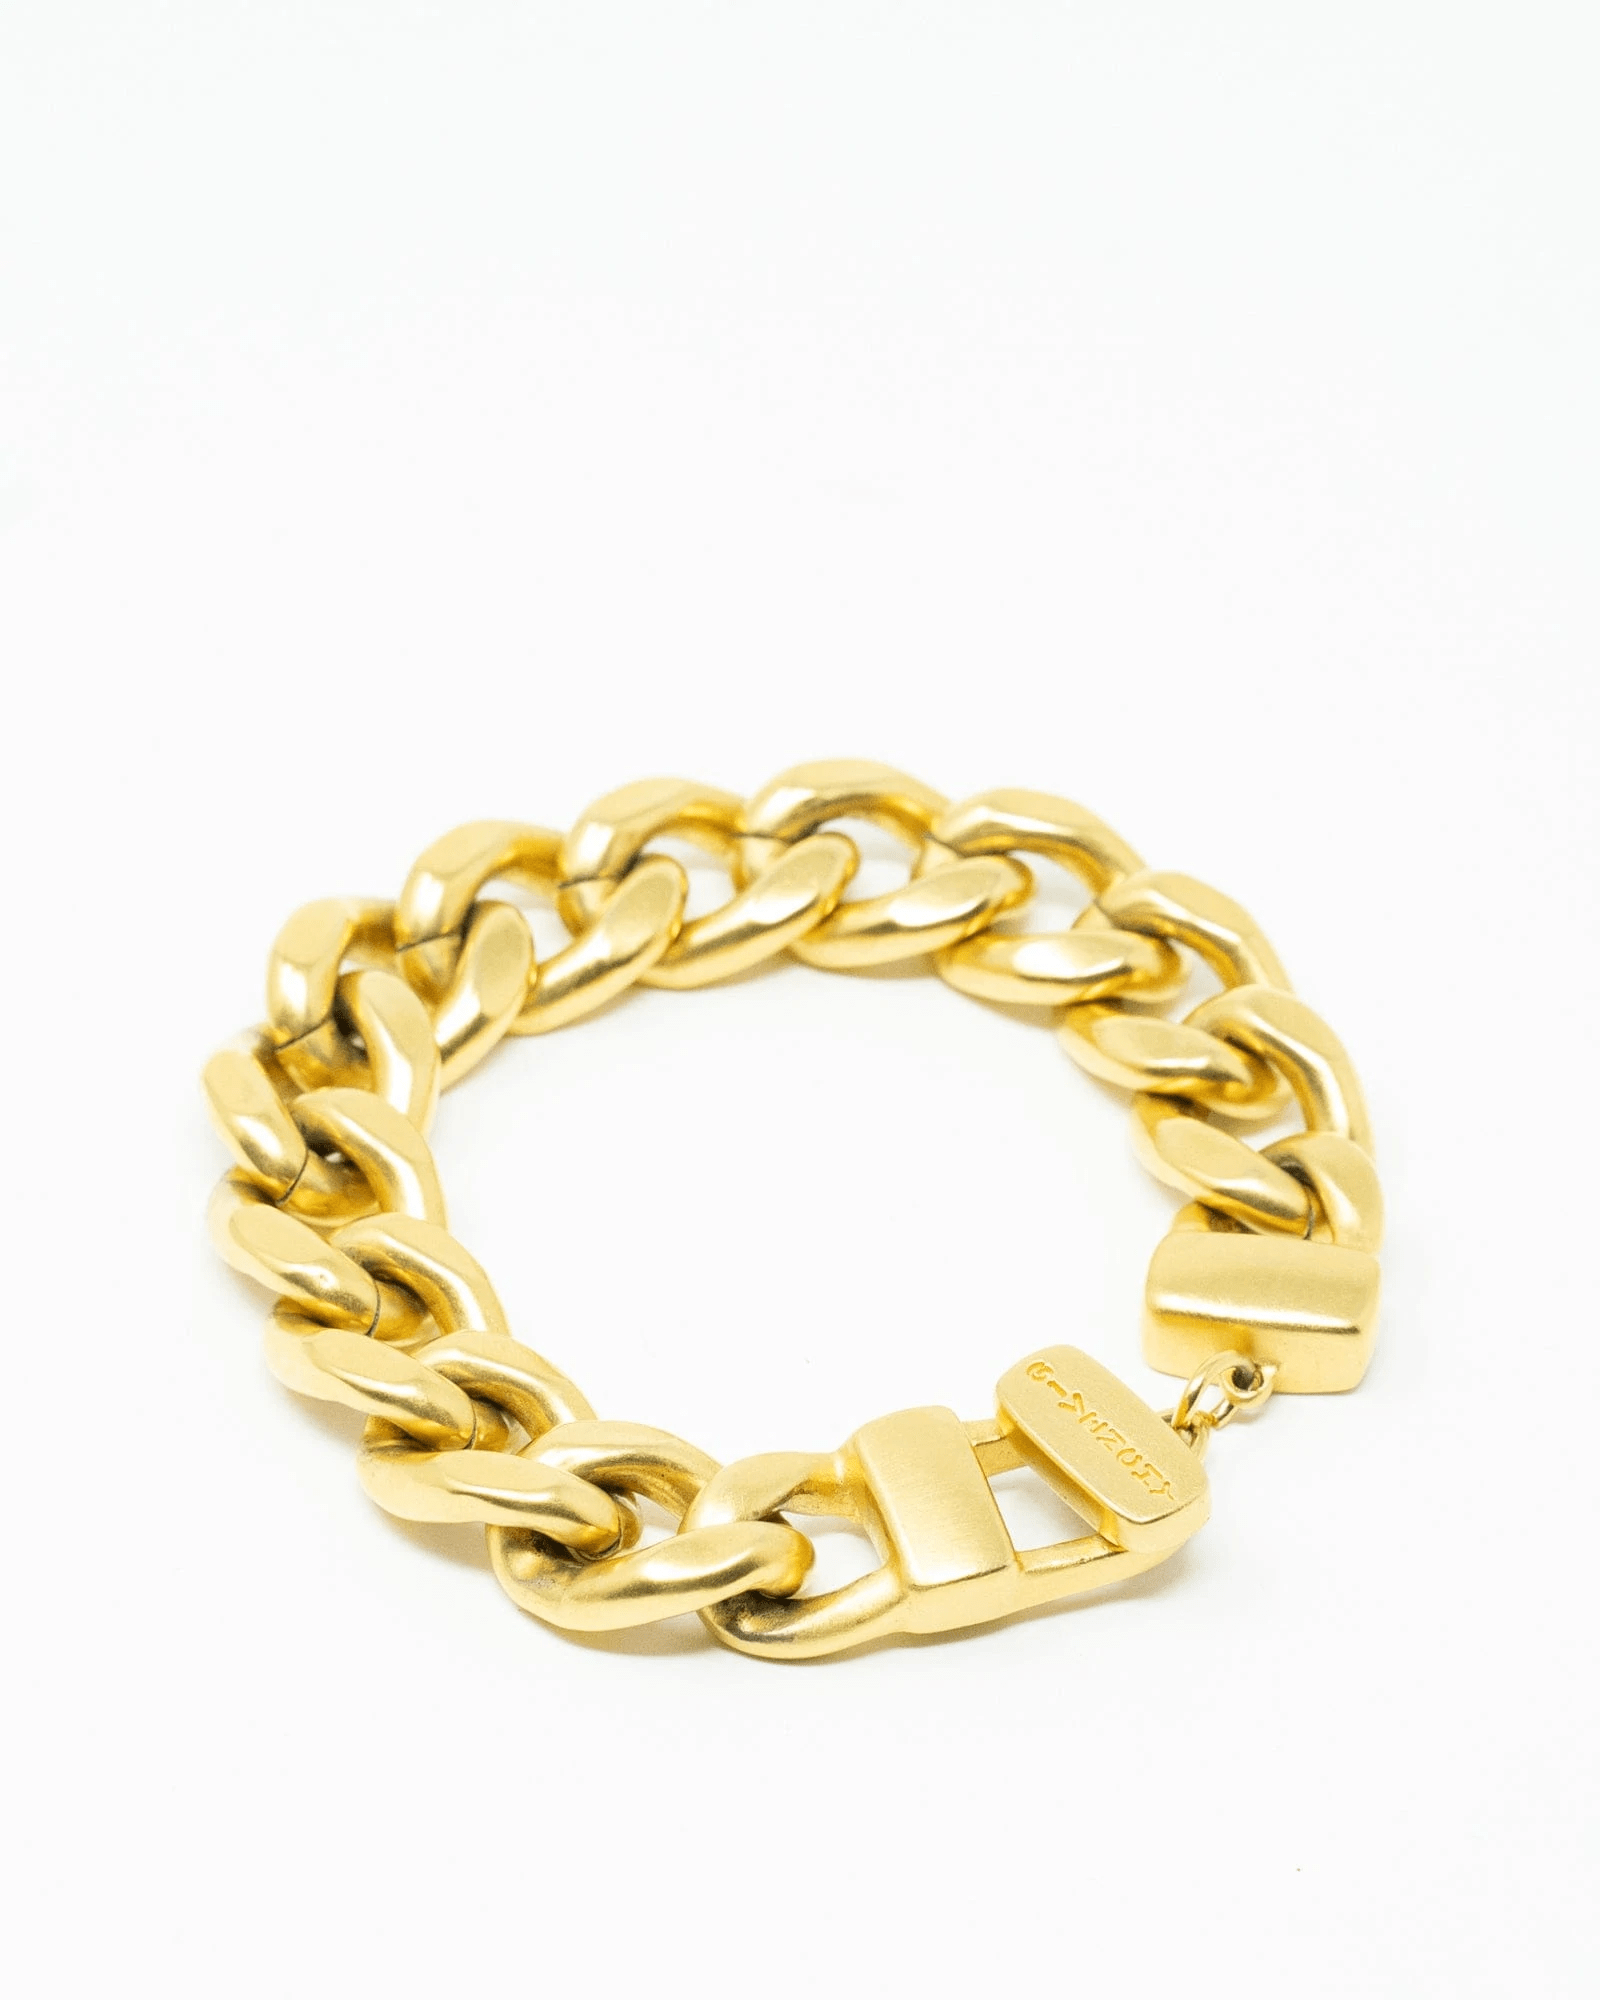 Givenchy Vintage Givenchy Chunky Chain Bracelet 1980s AEL1010